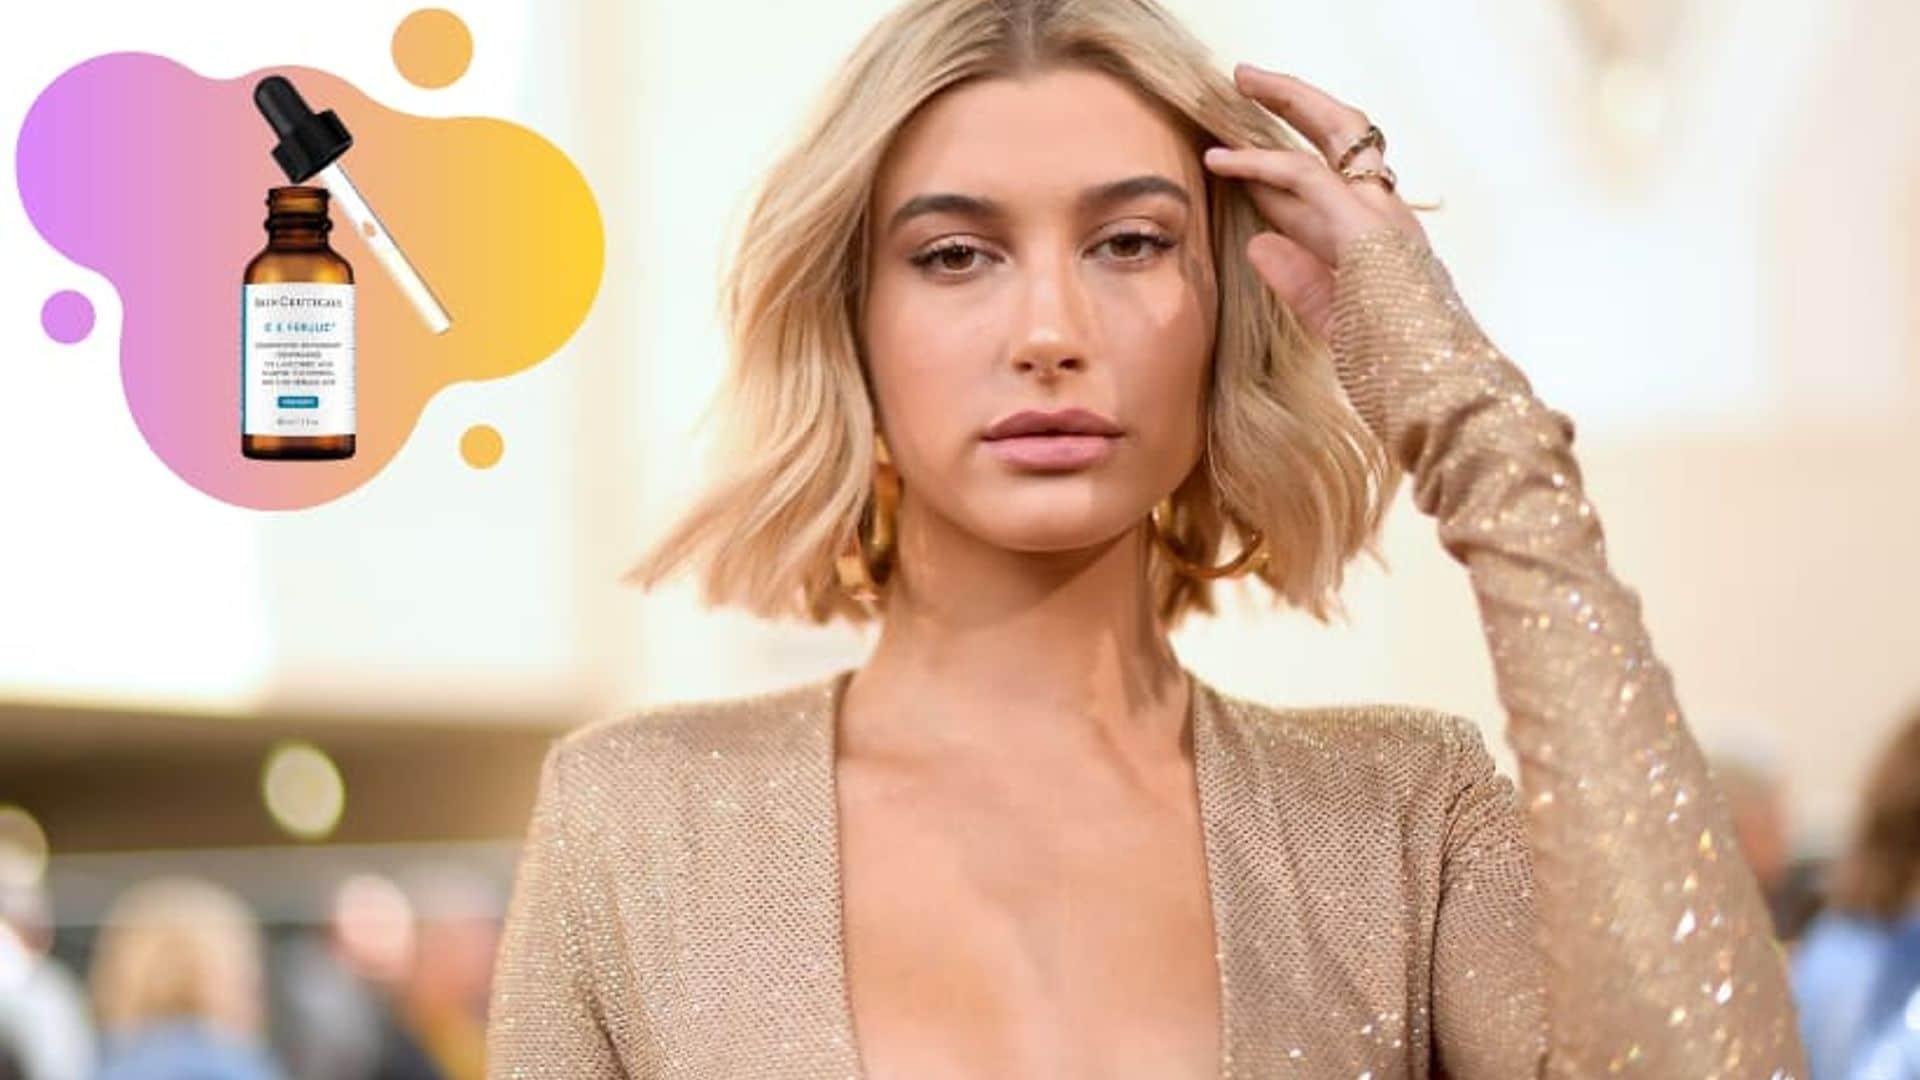 Hailey Bieber shared her $995 skincare routine and we’ve broken down every product